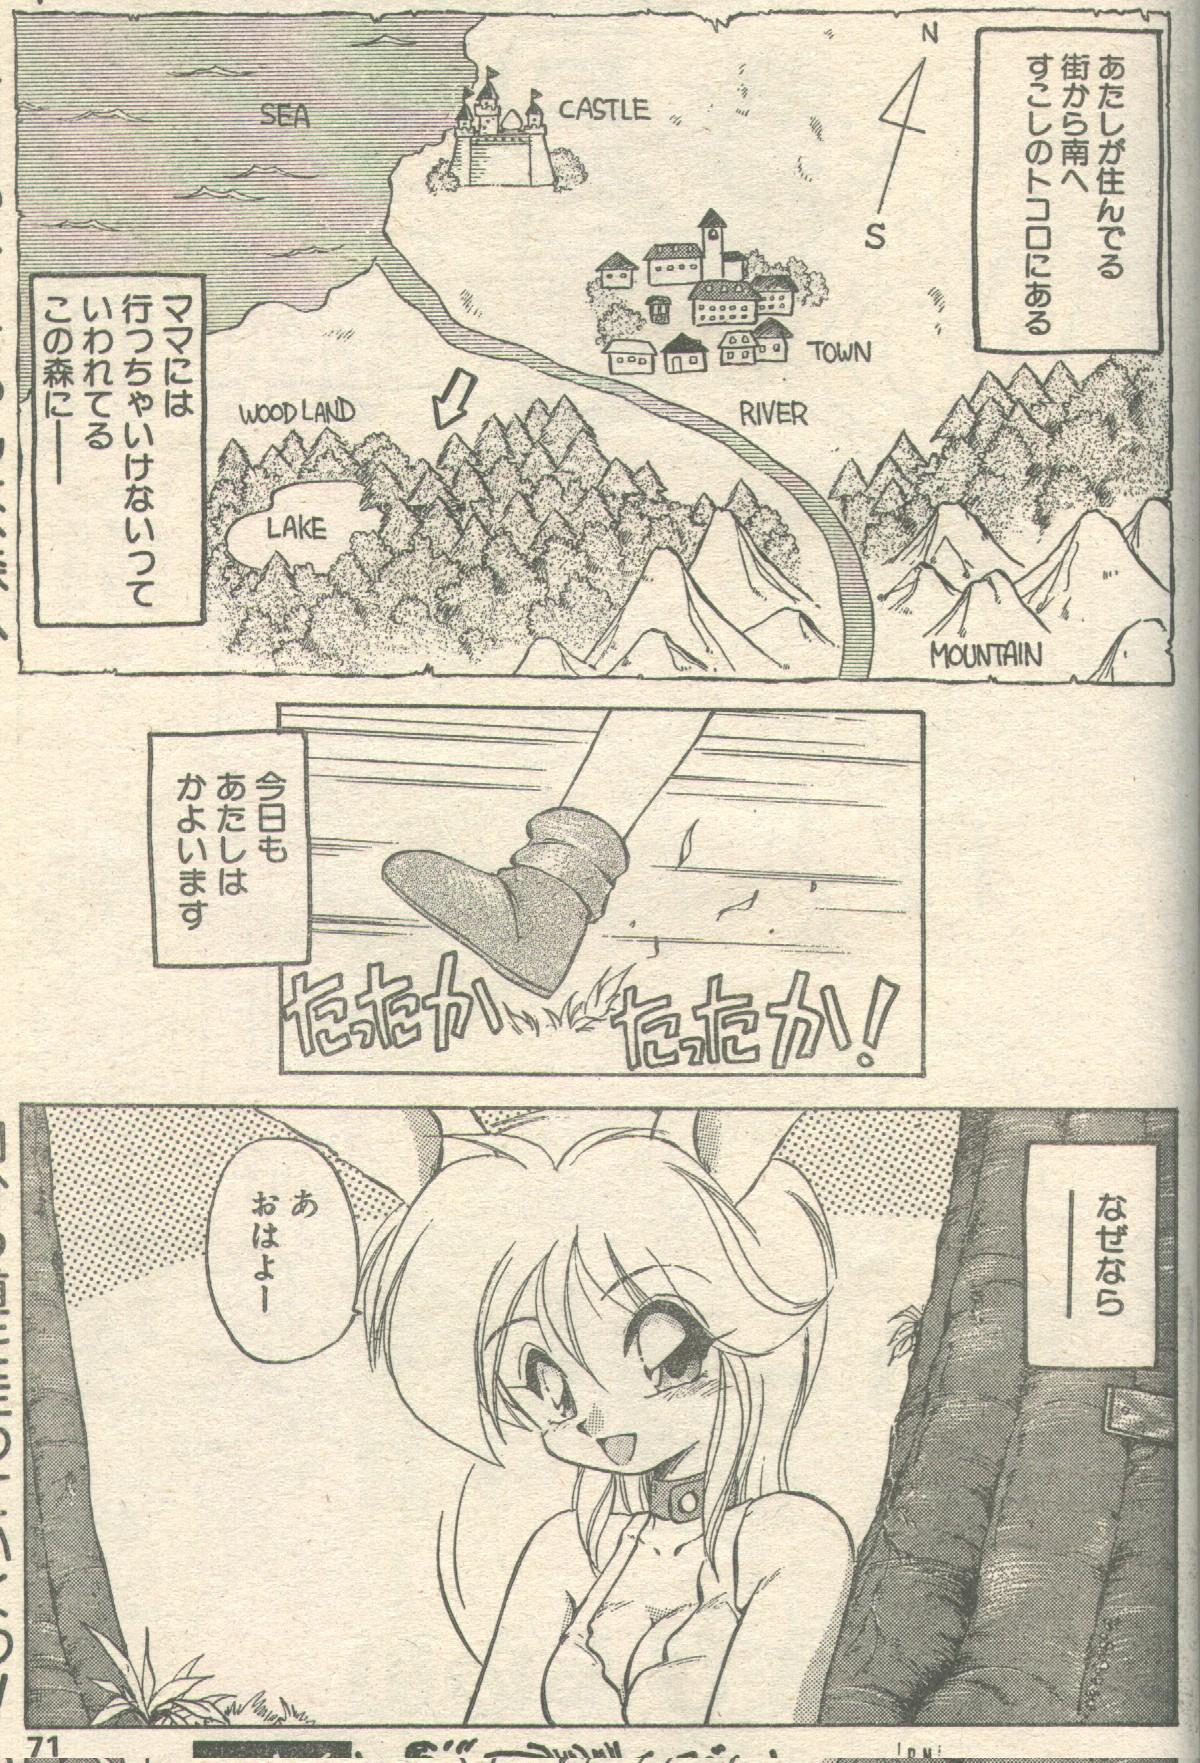 Candy Time 1993-05 [Incomplete] page 42 full